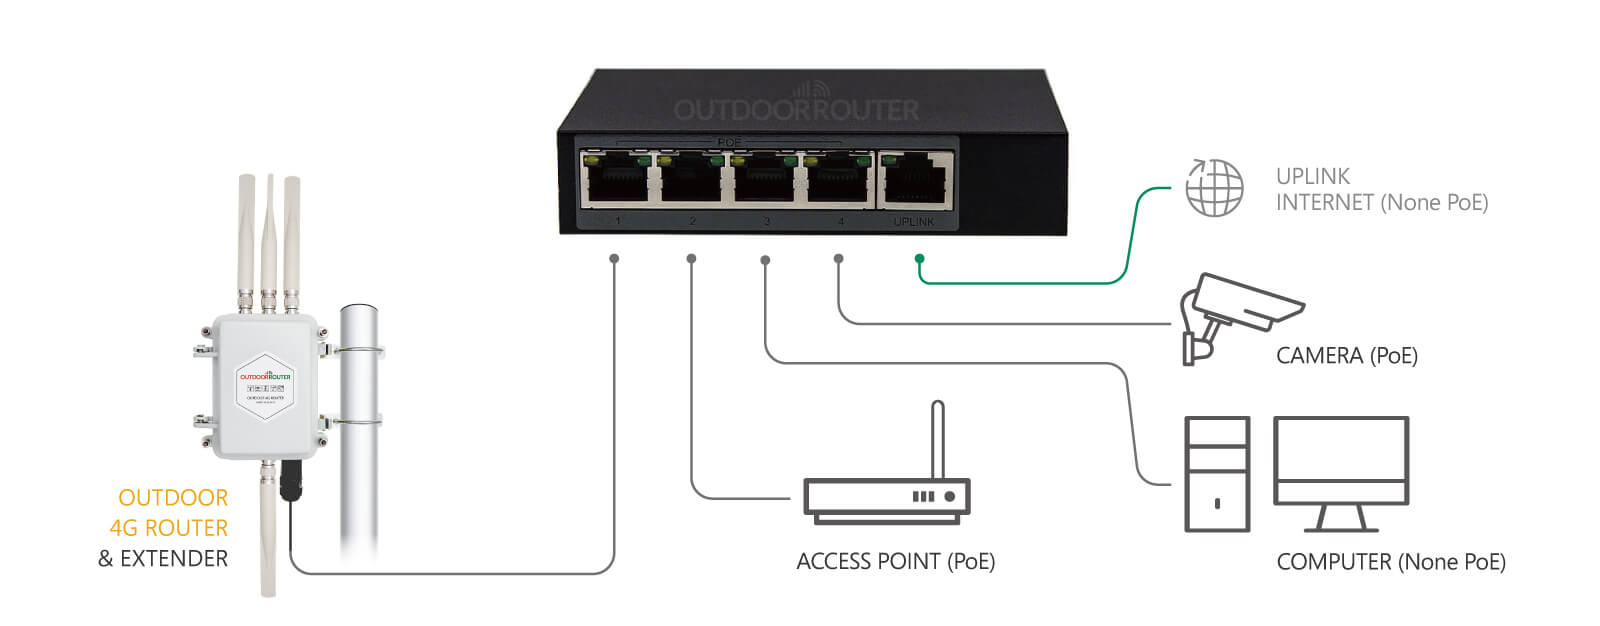 PoE Switch Expand Outdoor 4G Router Network Connections